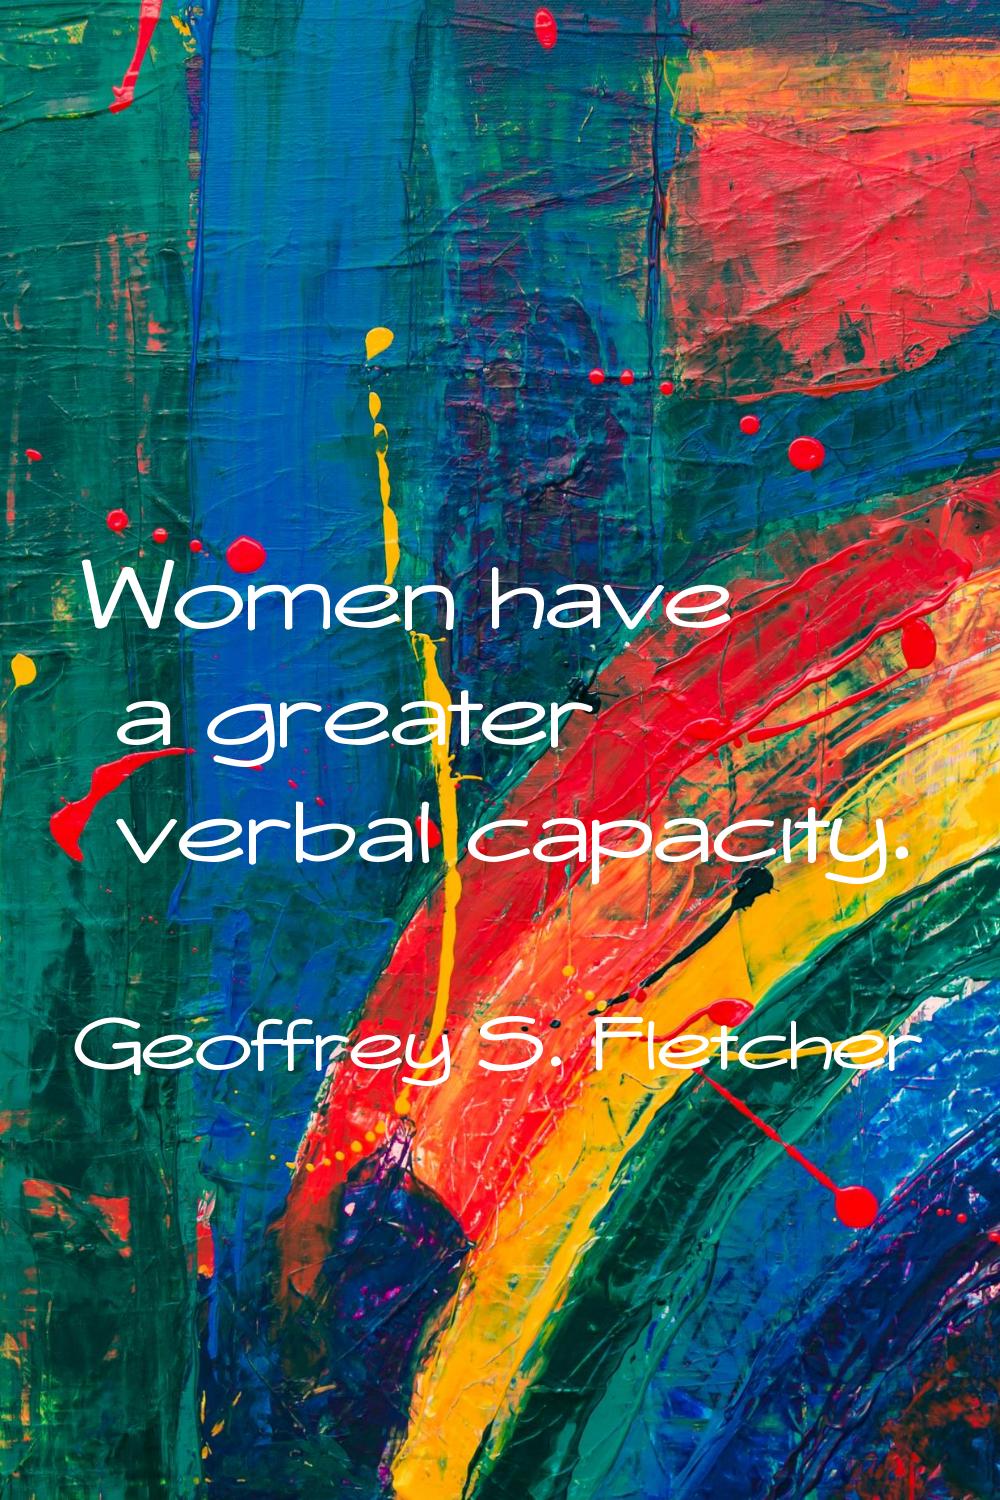 Women have a greater verbal capacity.